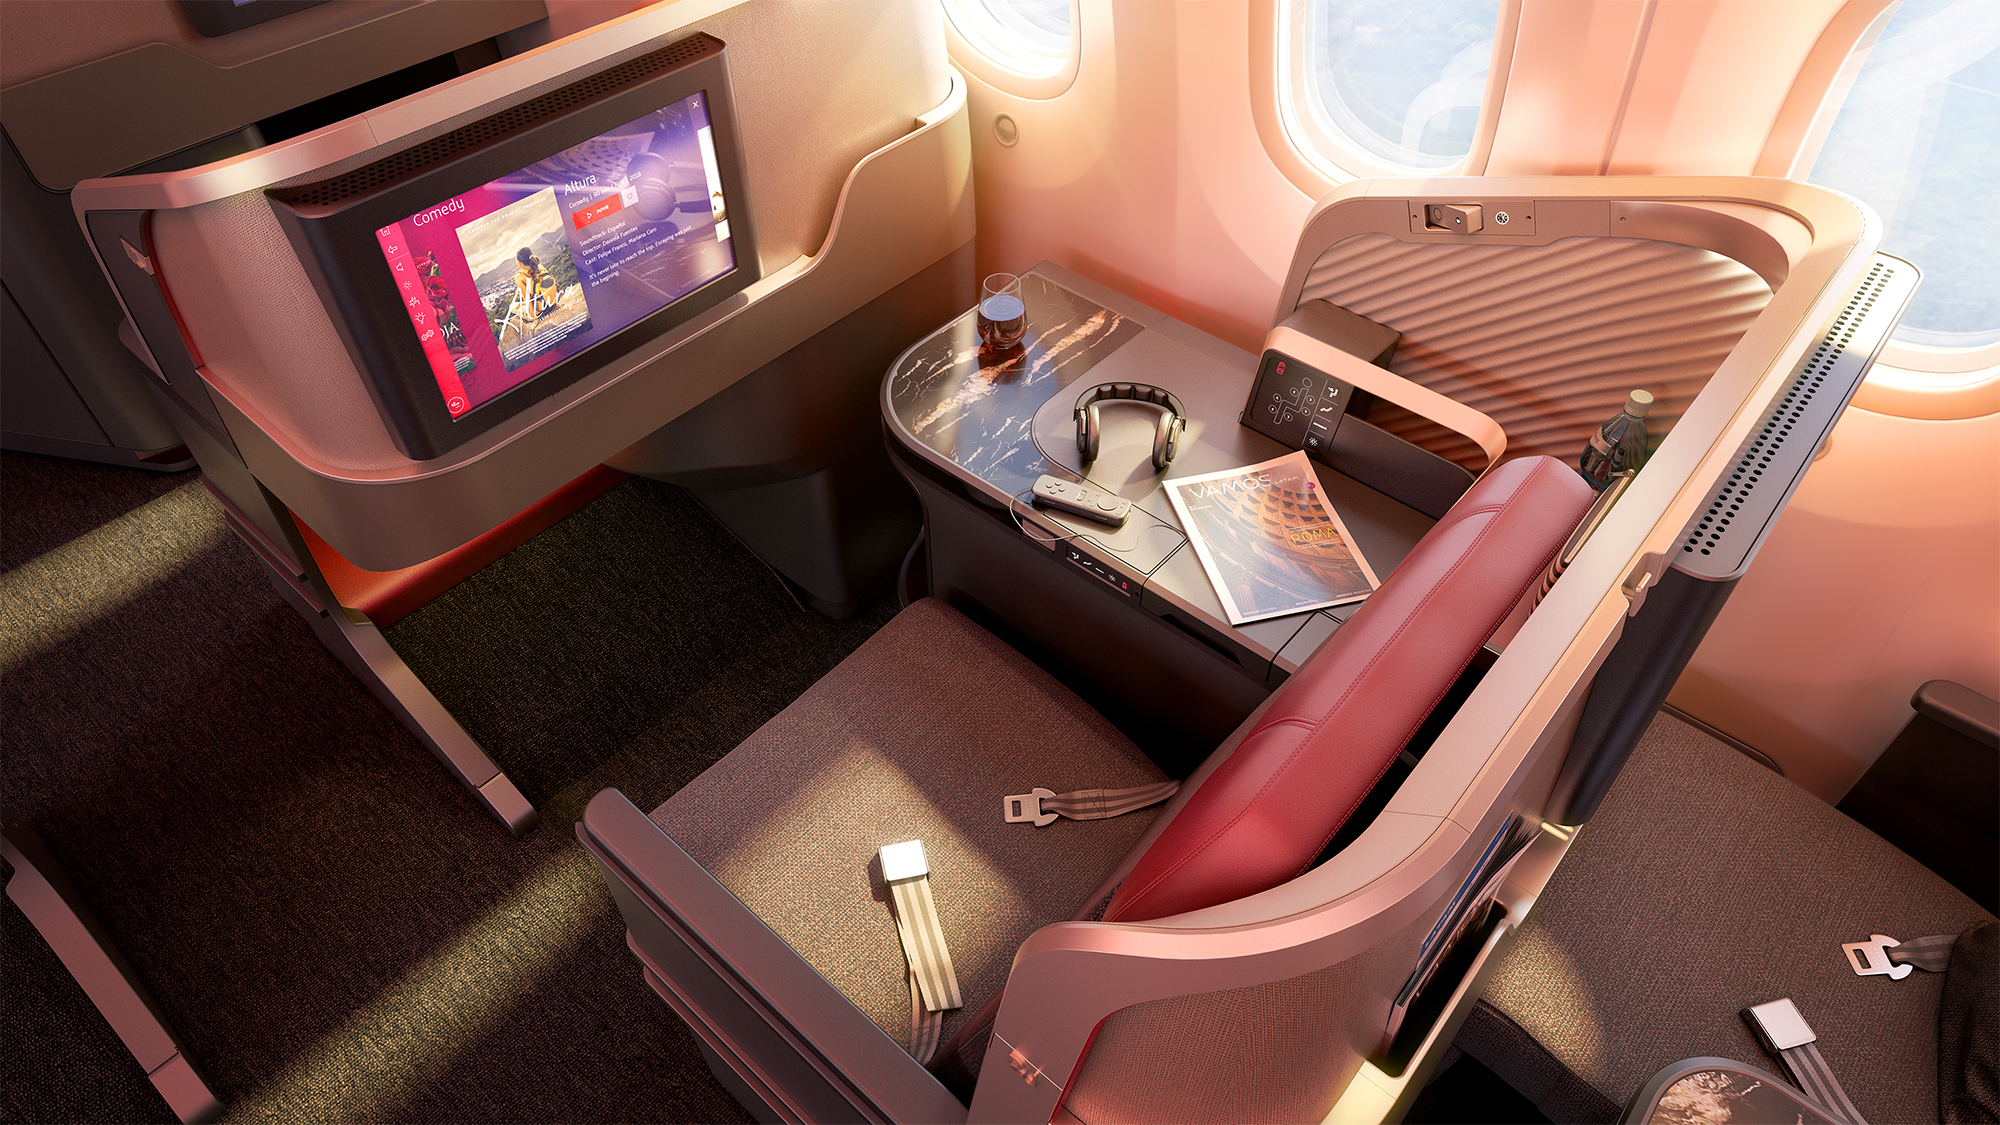 How to Get Upgrades on Airline Flights